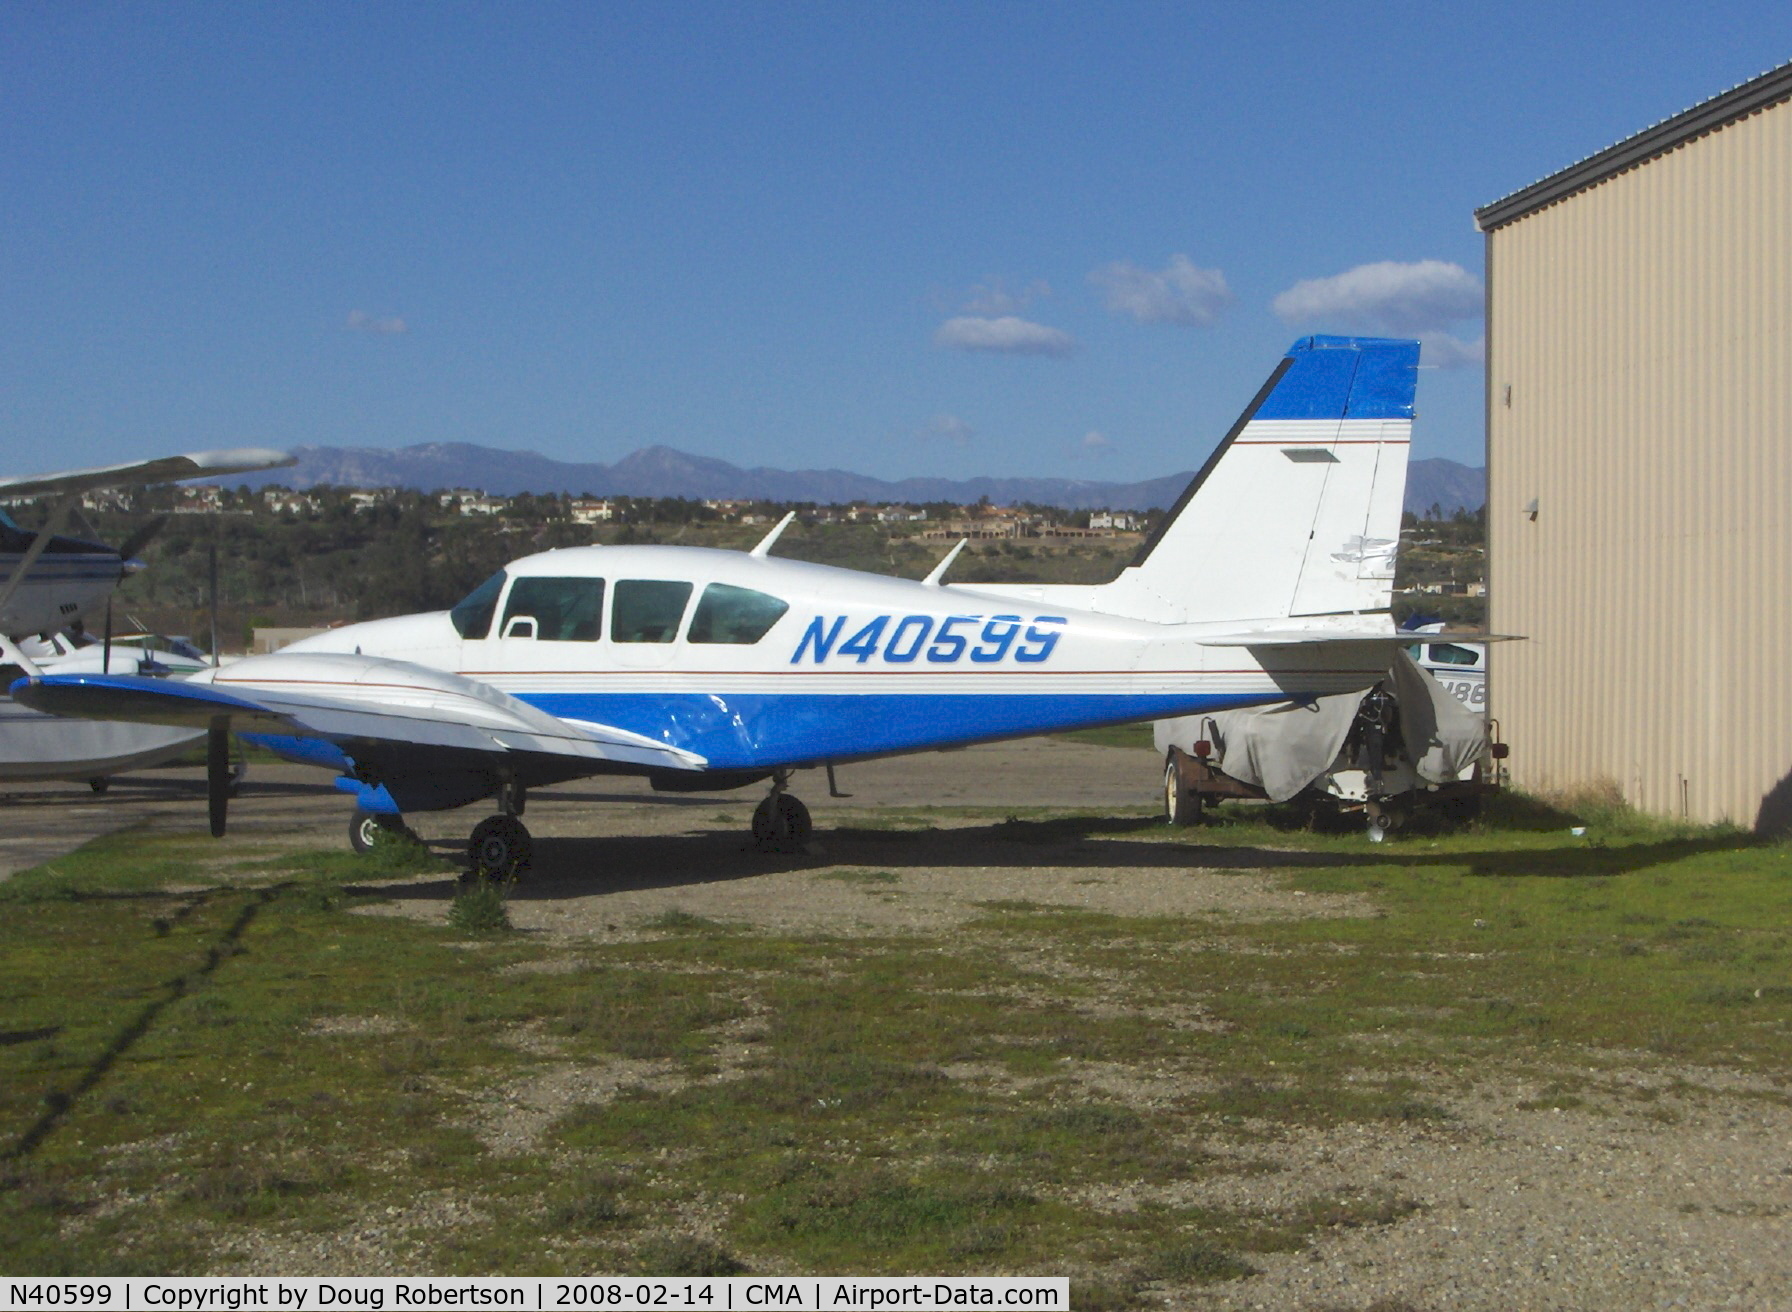 N40599, 1974 Piper PA-23-250 C/N 27-7405345, 1974 Piper PA-23-250 Turbo AZTEC E, two Lycoming TIO-540-C1A 250 Hp each